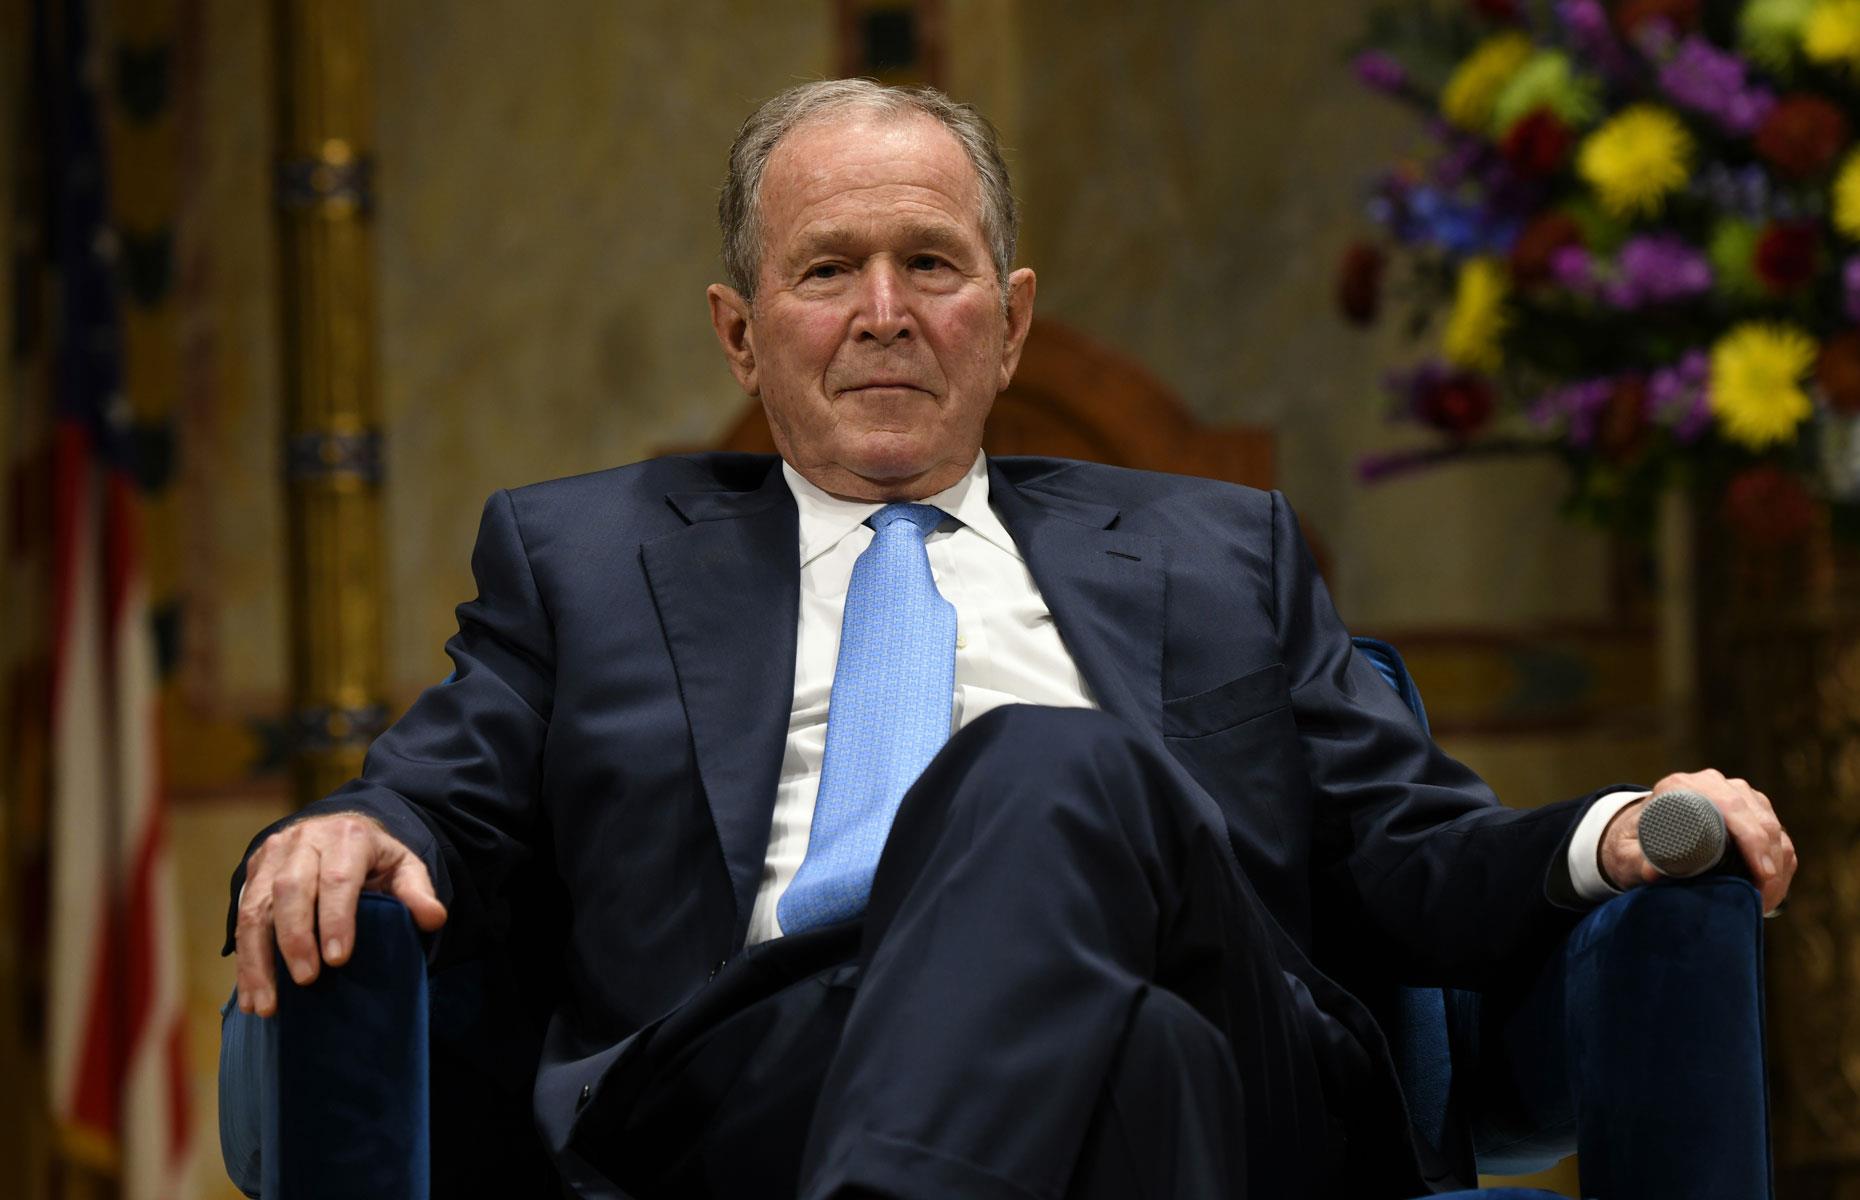 <p>Estimates of George W Bush's wealth are far more consistent. According to reports, he was worth $20 million when he became US president in 2001 and has since seen his fortune rise to an estimated $50 million.</p>  <p>George made his pre-presidency money from the oil industry, as well as his ownership of the Texas Rangers baseball team.</p>